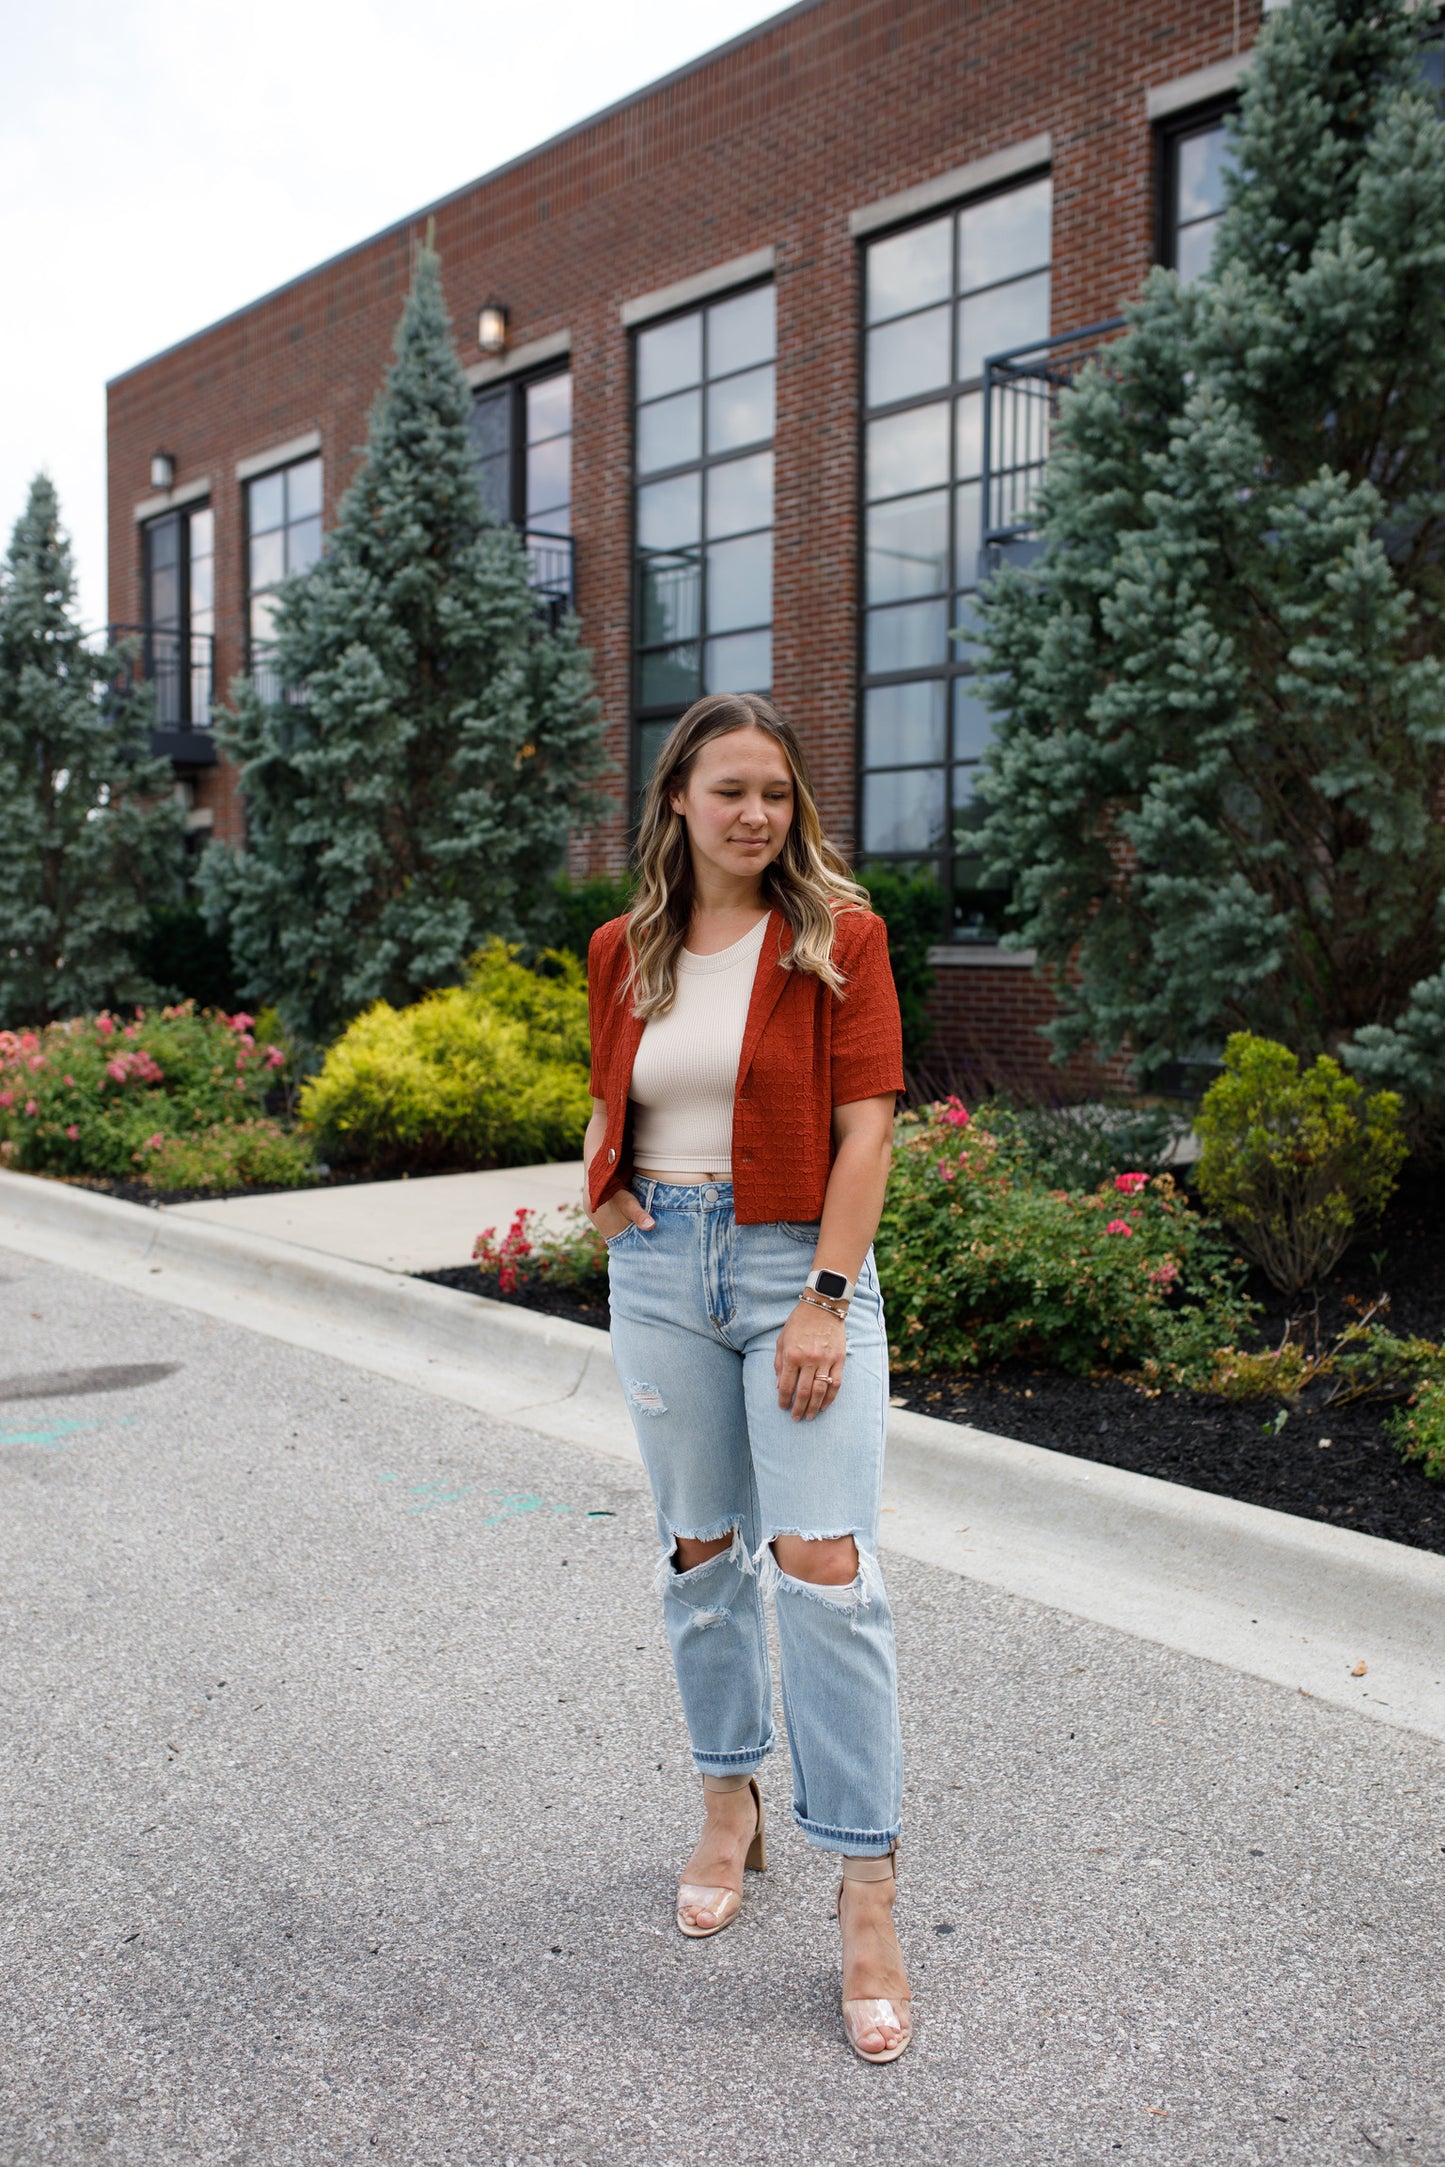 How to Style Jeans for Summer